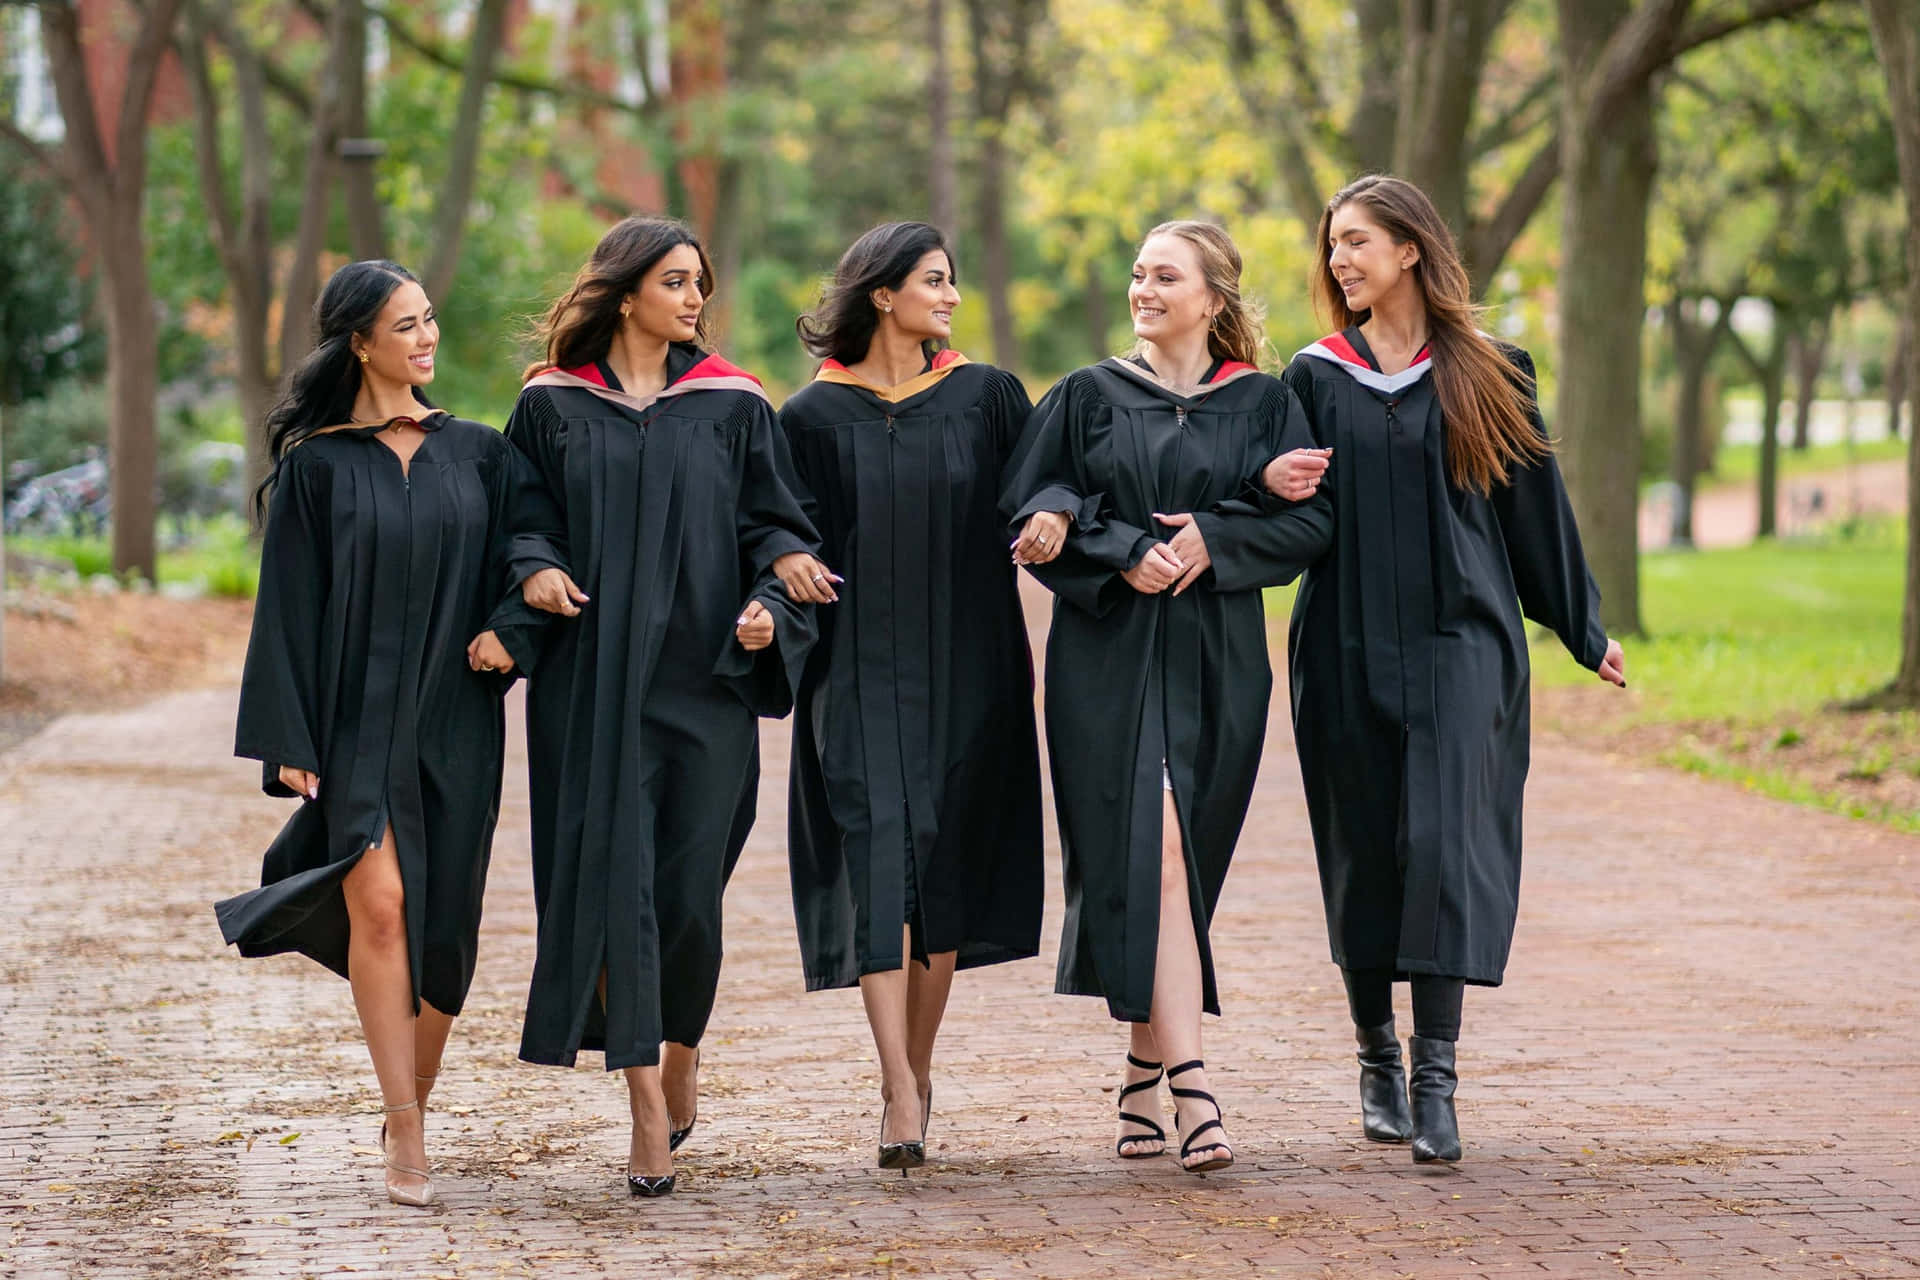 Four Women In Black Graduation Gowns Walking Together